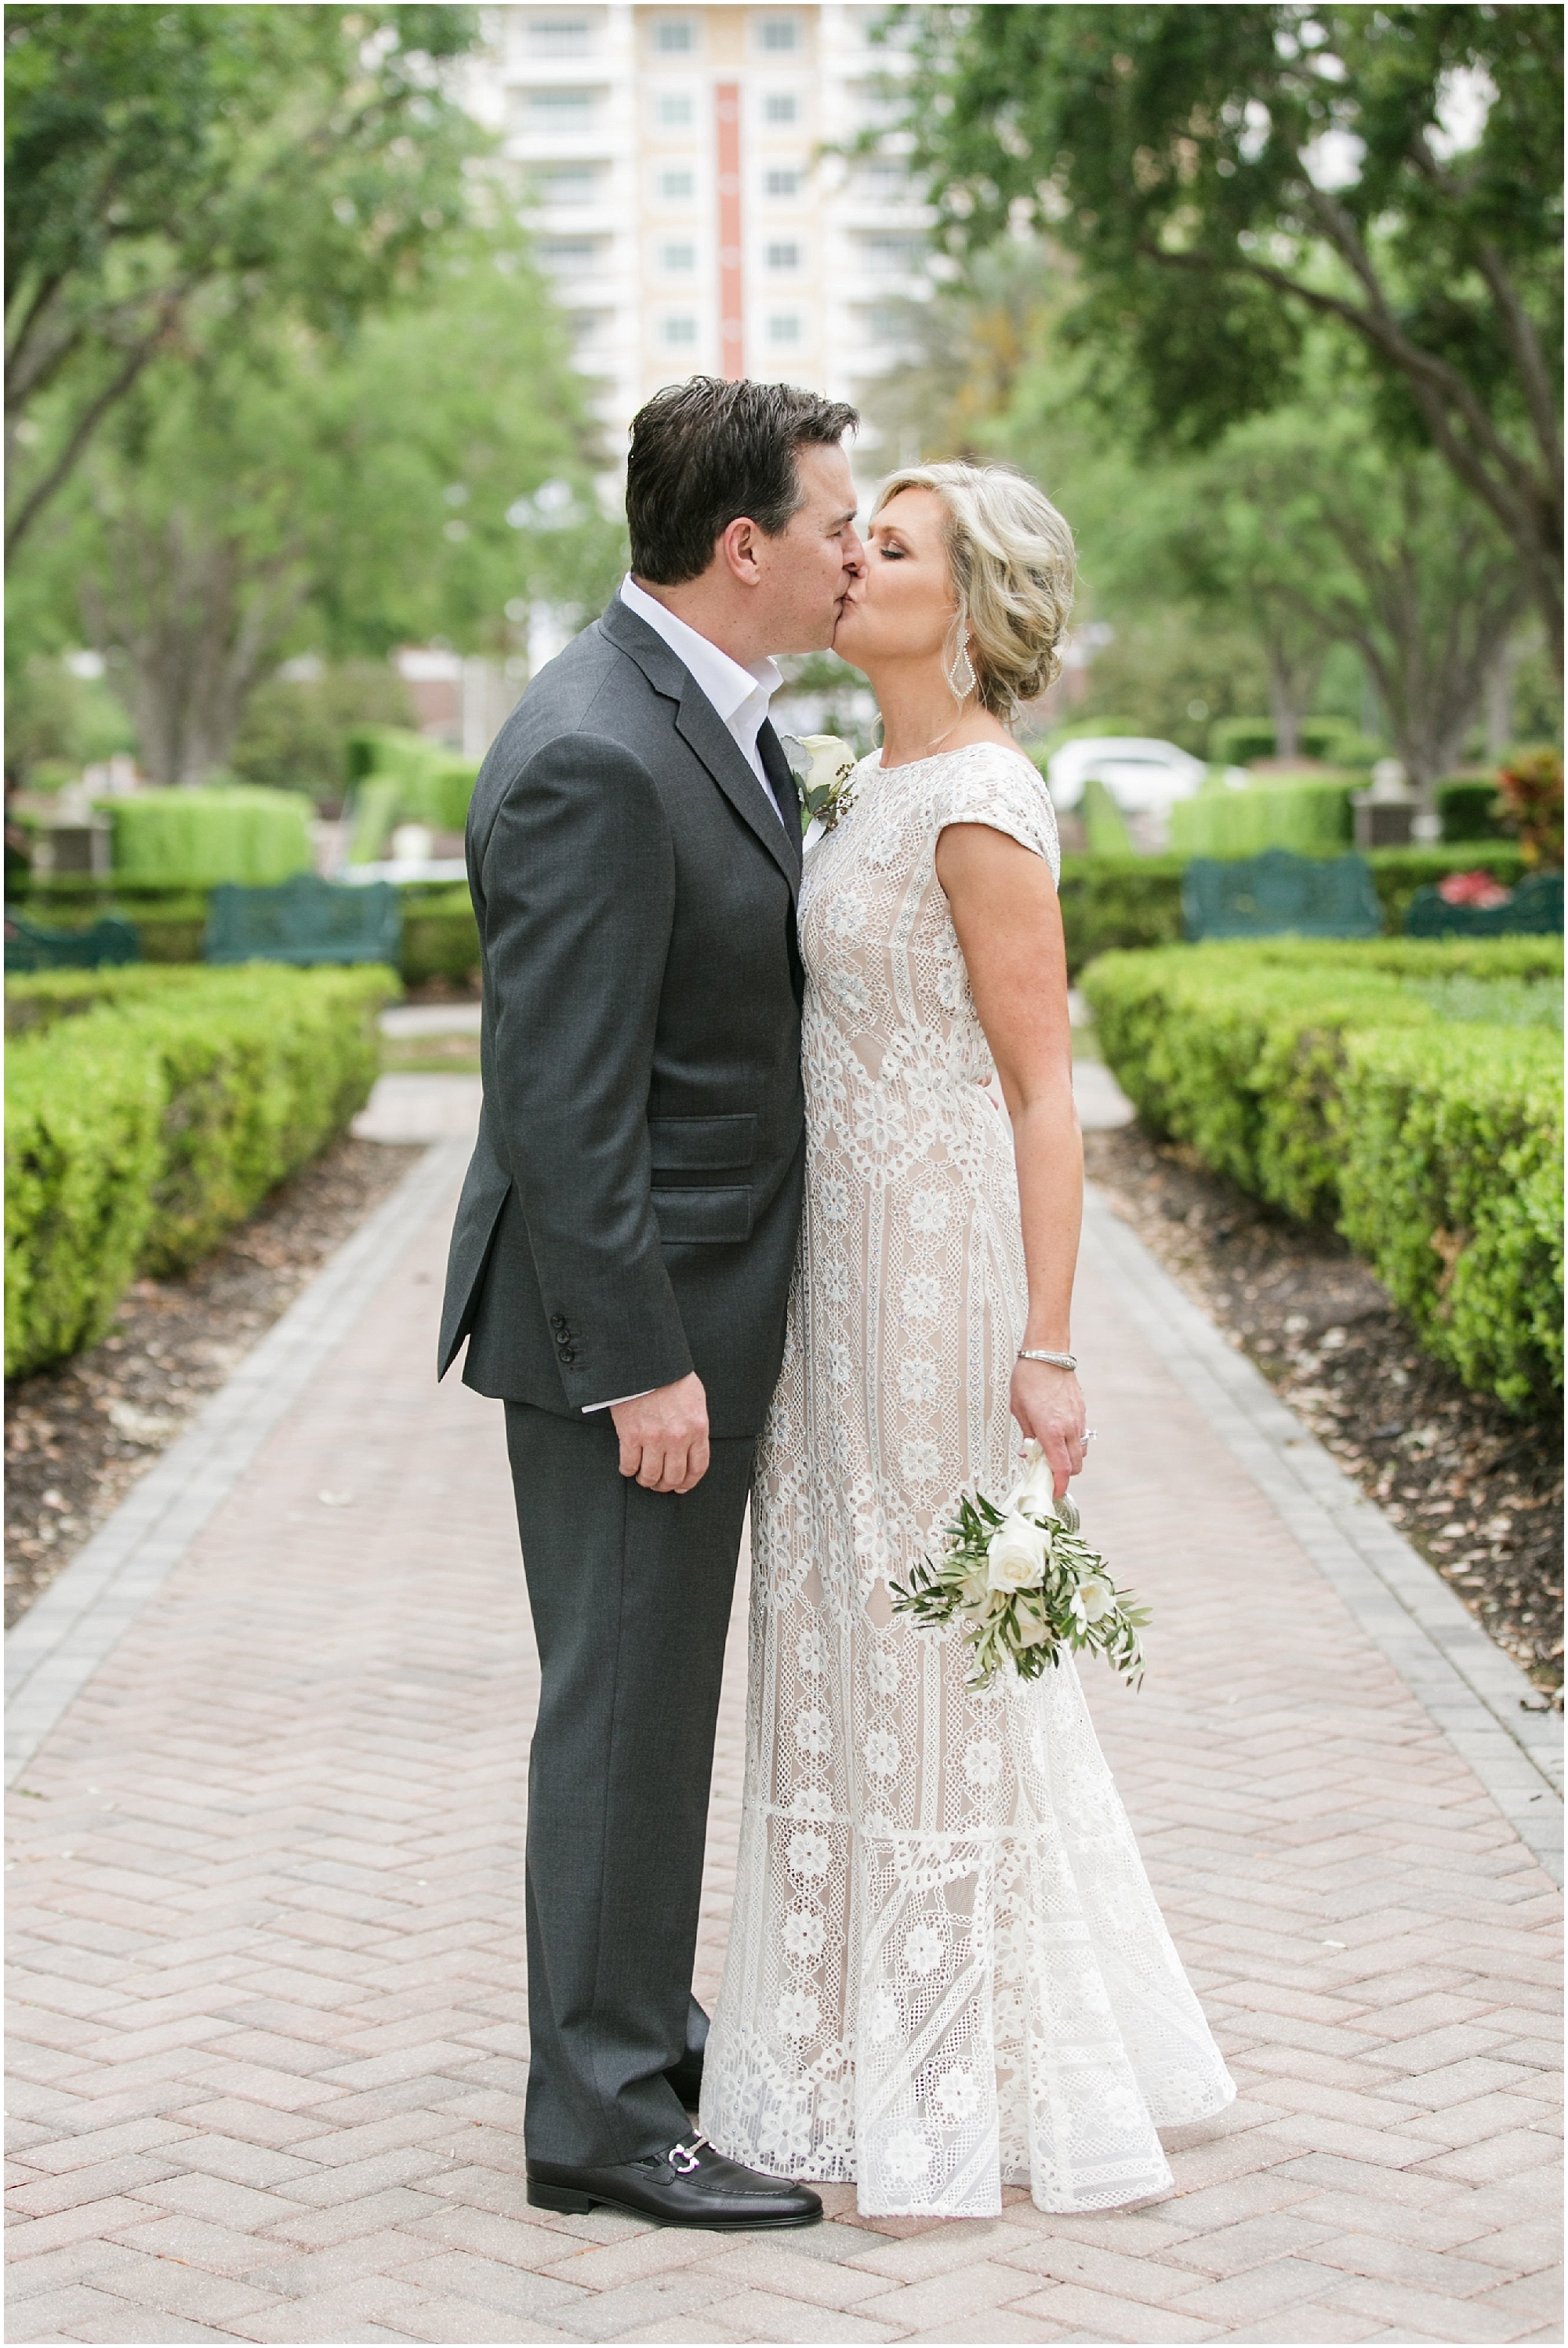 Beautiful Blended Family wedding bride and groom kissing after their ceremony.